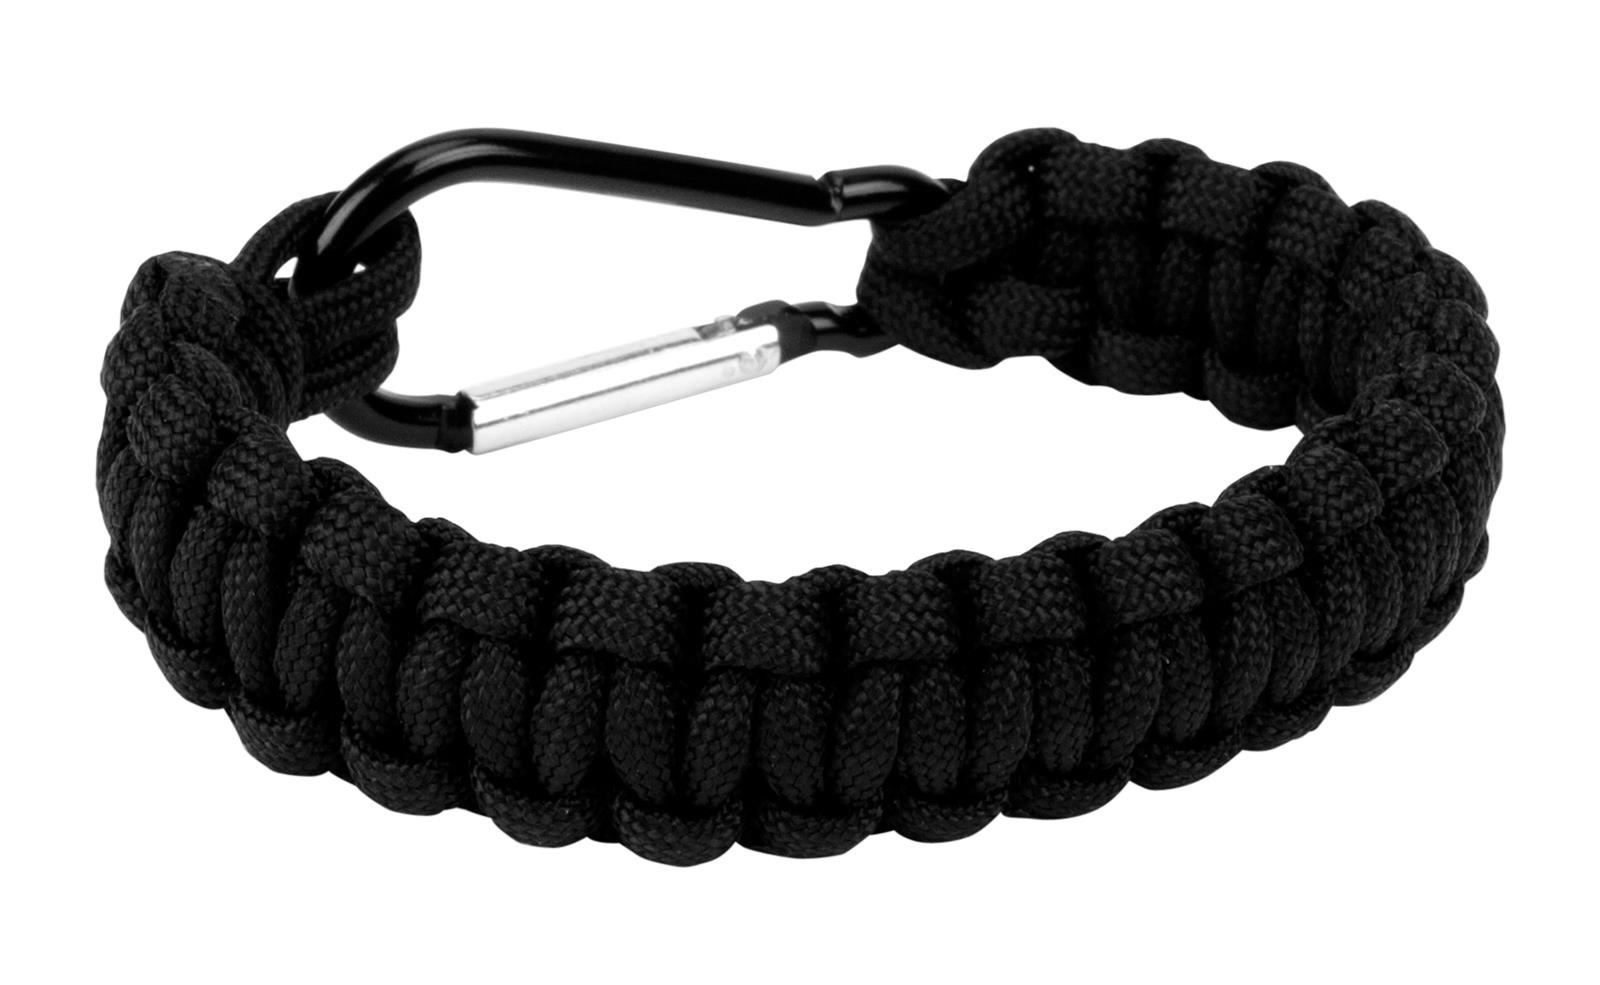 Buy Mad Max Style Adjustable Paracord Bracelet Online in India - Etsy